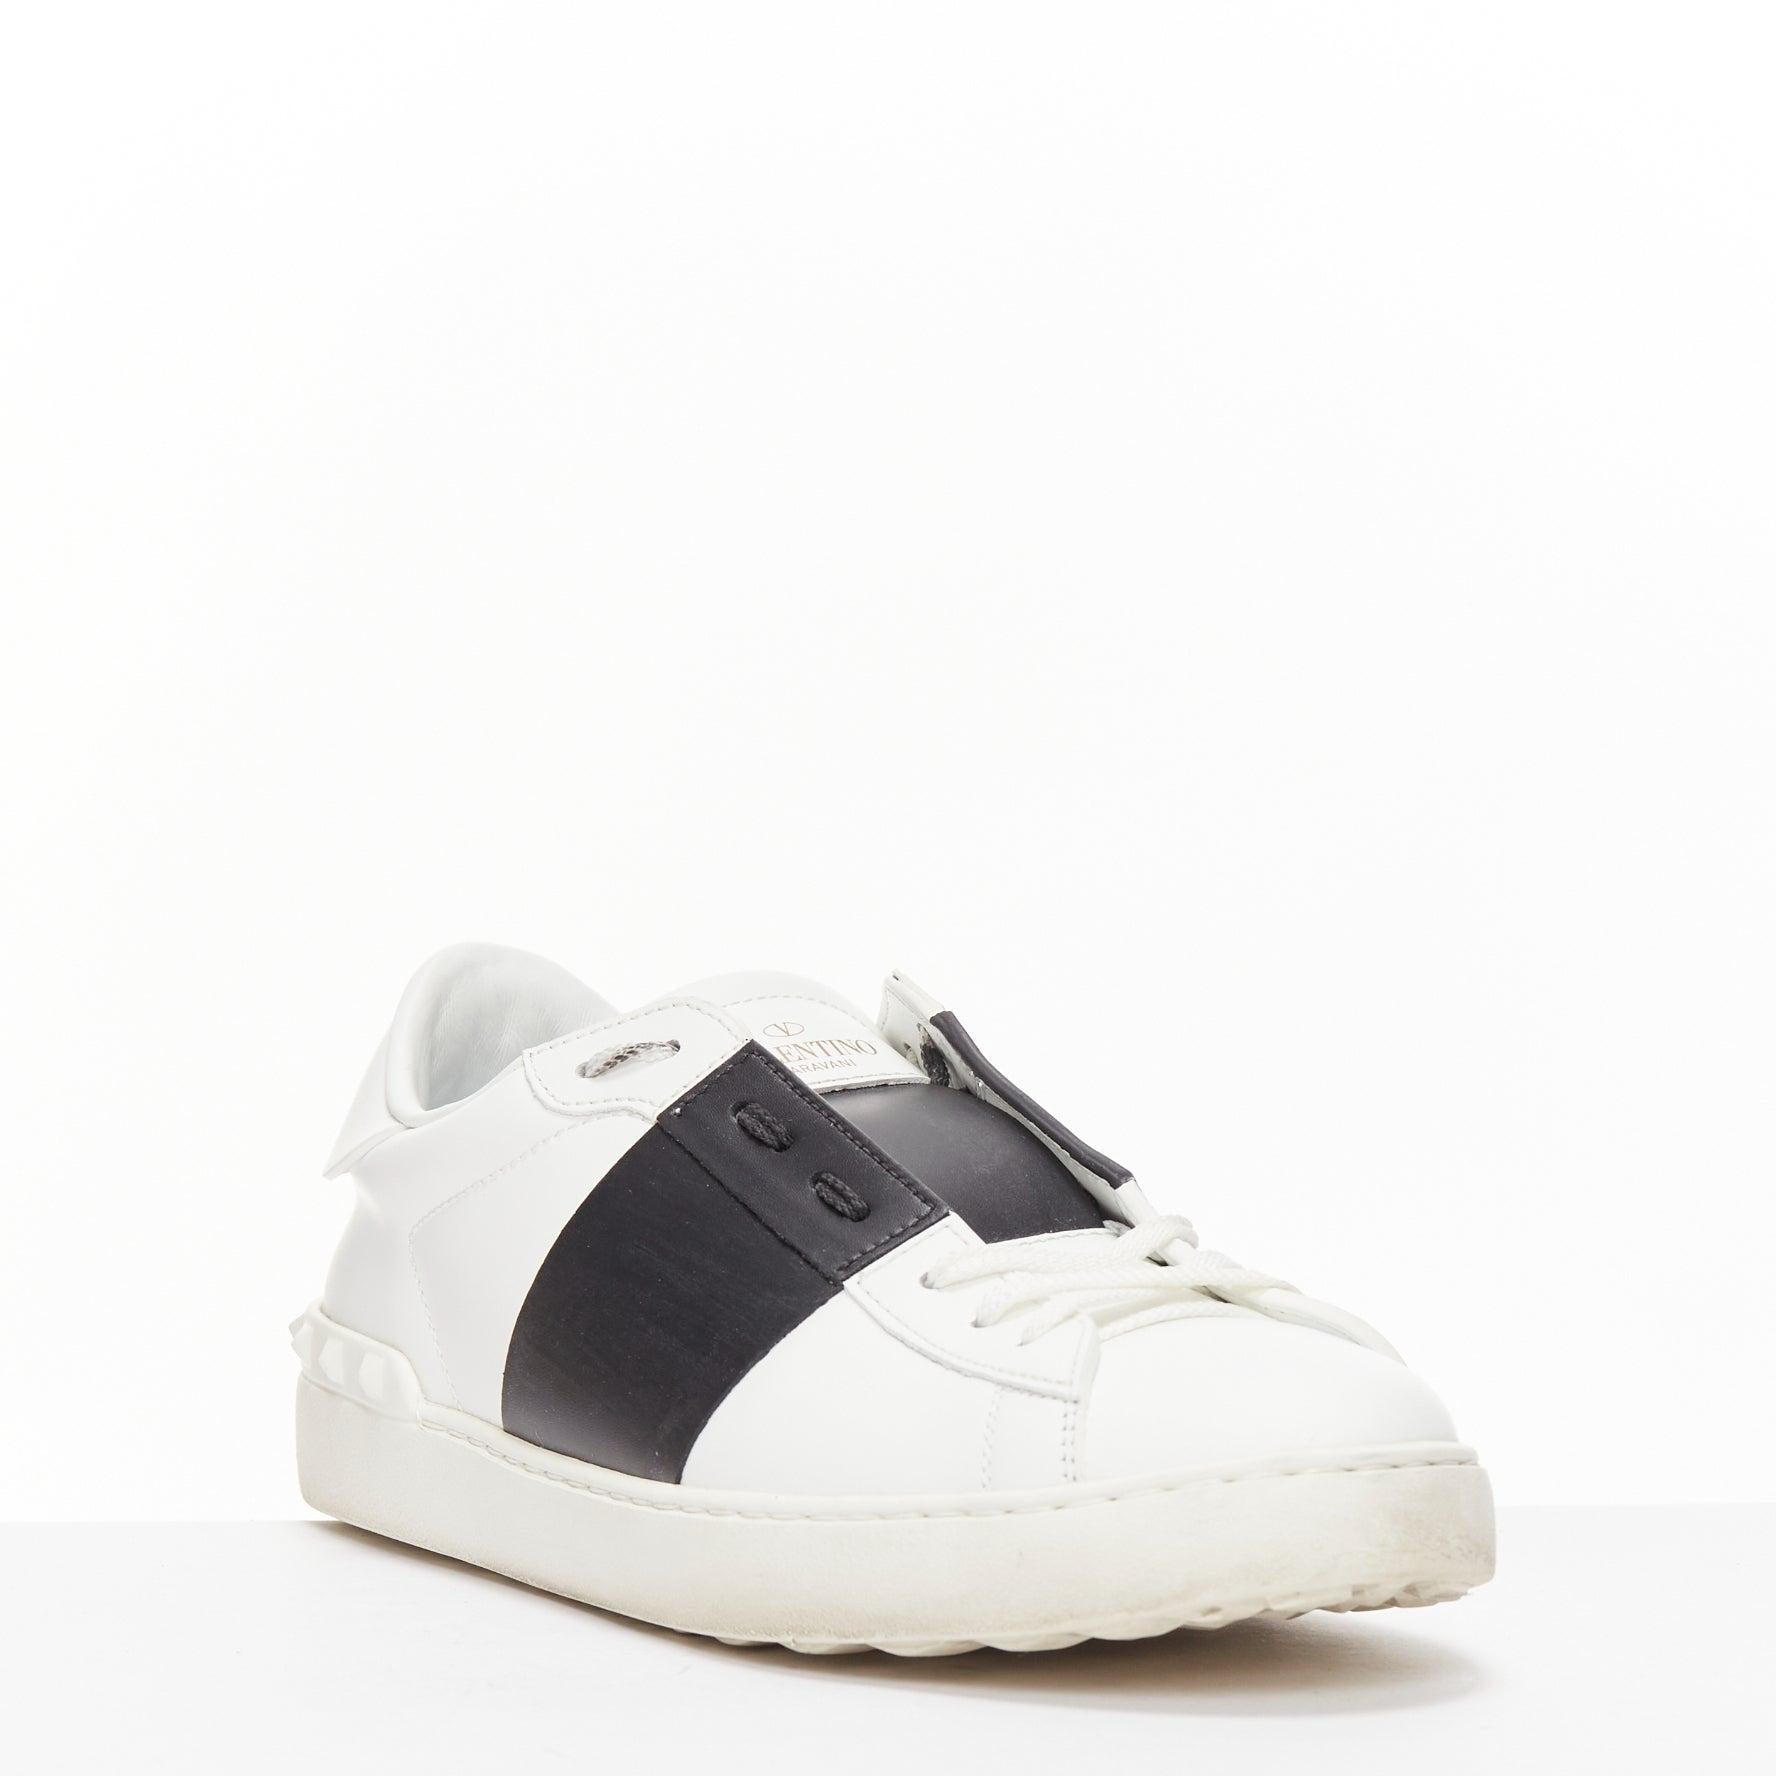 VALENTINO Rockstud black white leather lace up studded slip on sneakers EU42
Reference: NILI/A00067
Brand: Valentino
Model: Rockstud
Material: Leather
Color: White, Black
Pattern: Studded
Closure: Slip On
Lining: White Leather
Extra Details: White